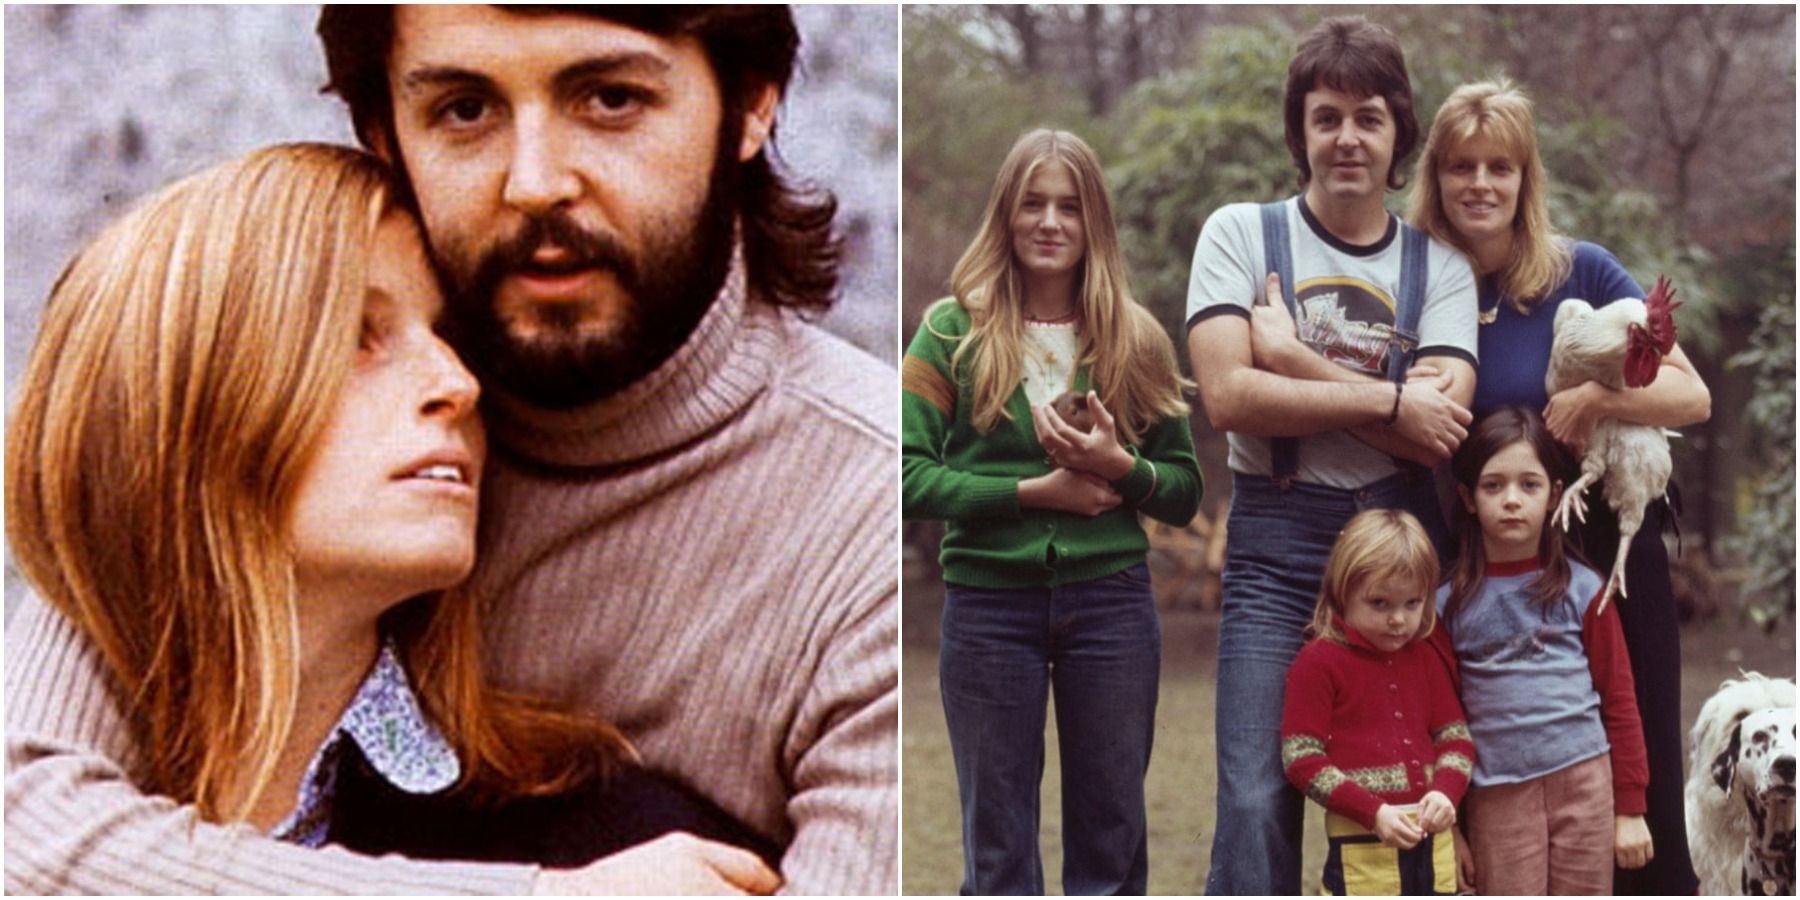 Paul & Linda McCartney: 10 Facts You Didn't Know About Their Relationship